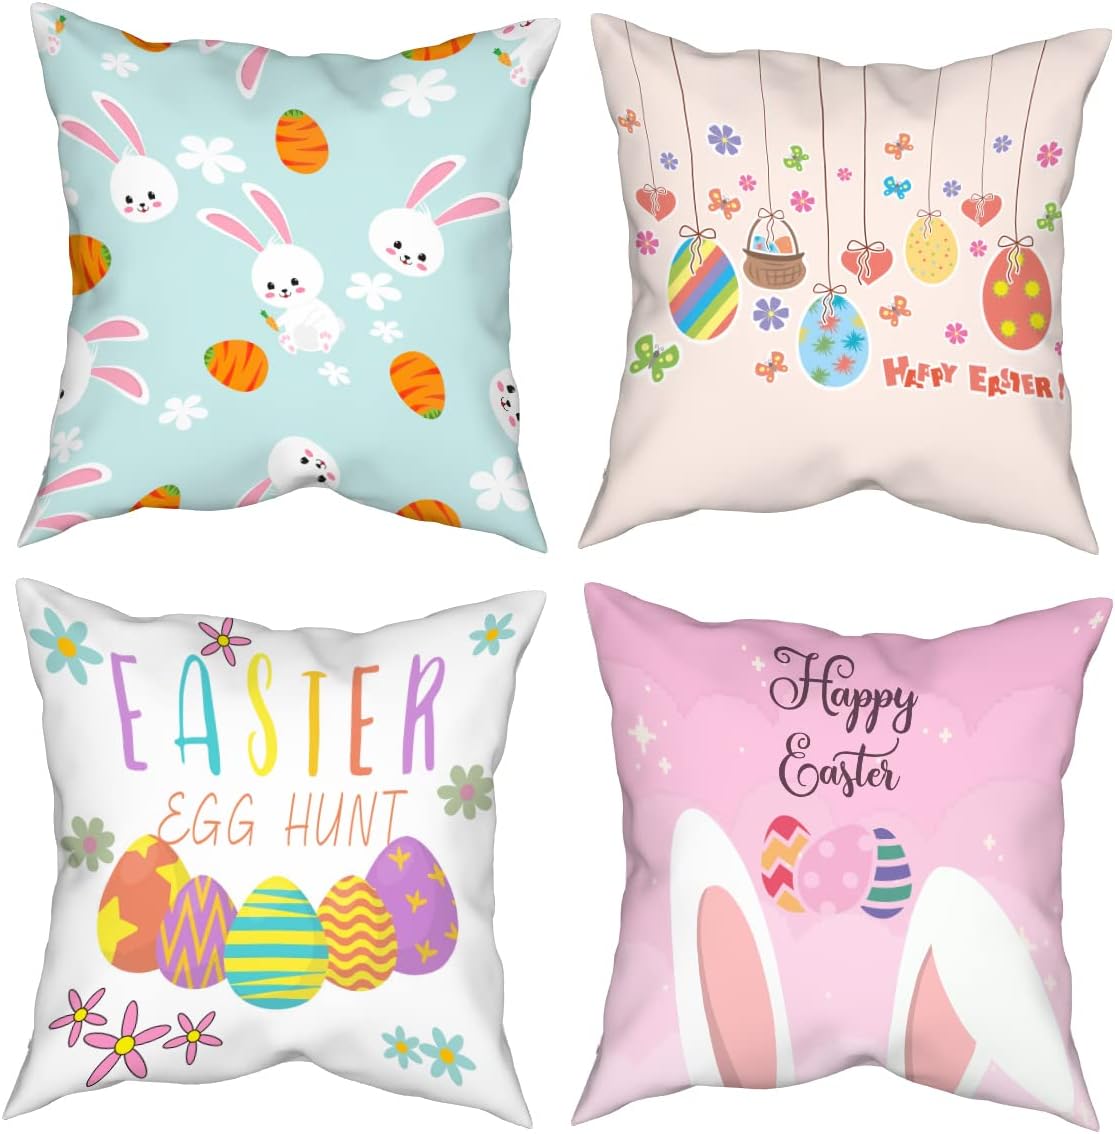 These are so cute and the perfect added touch to my Easter decore.